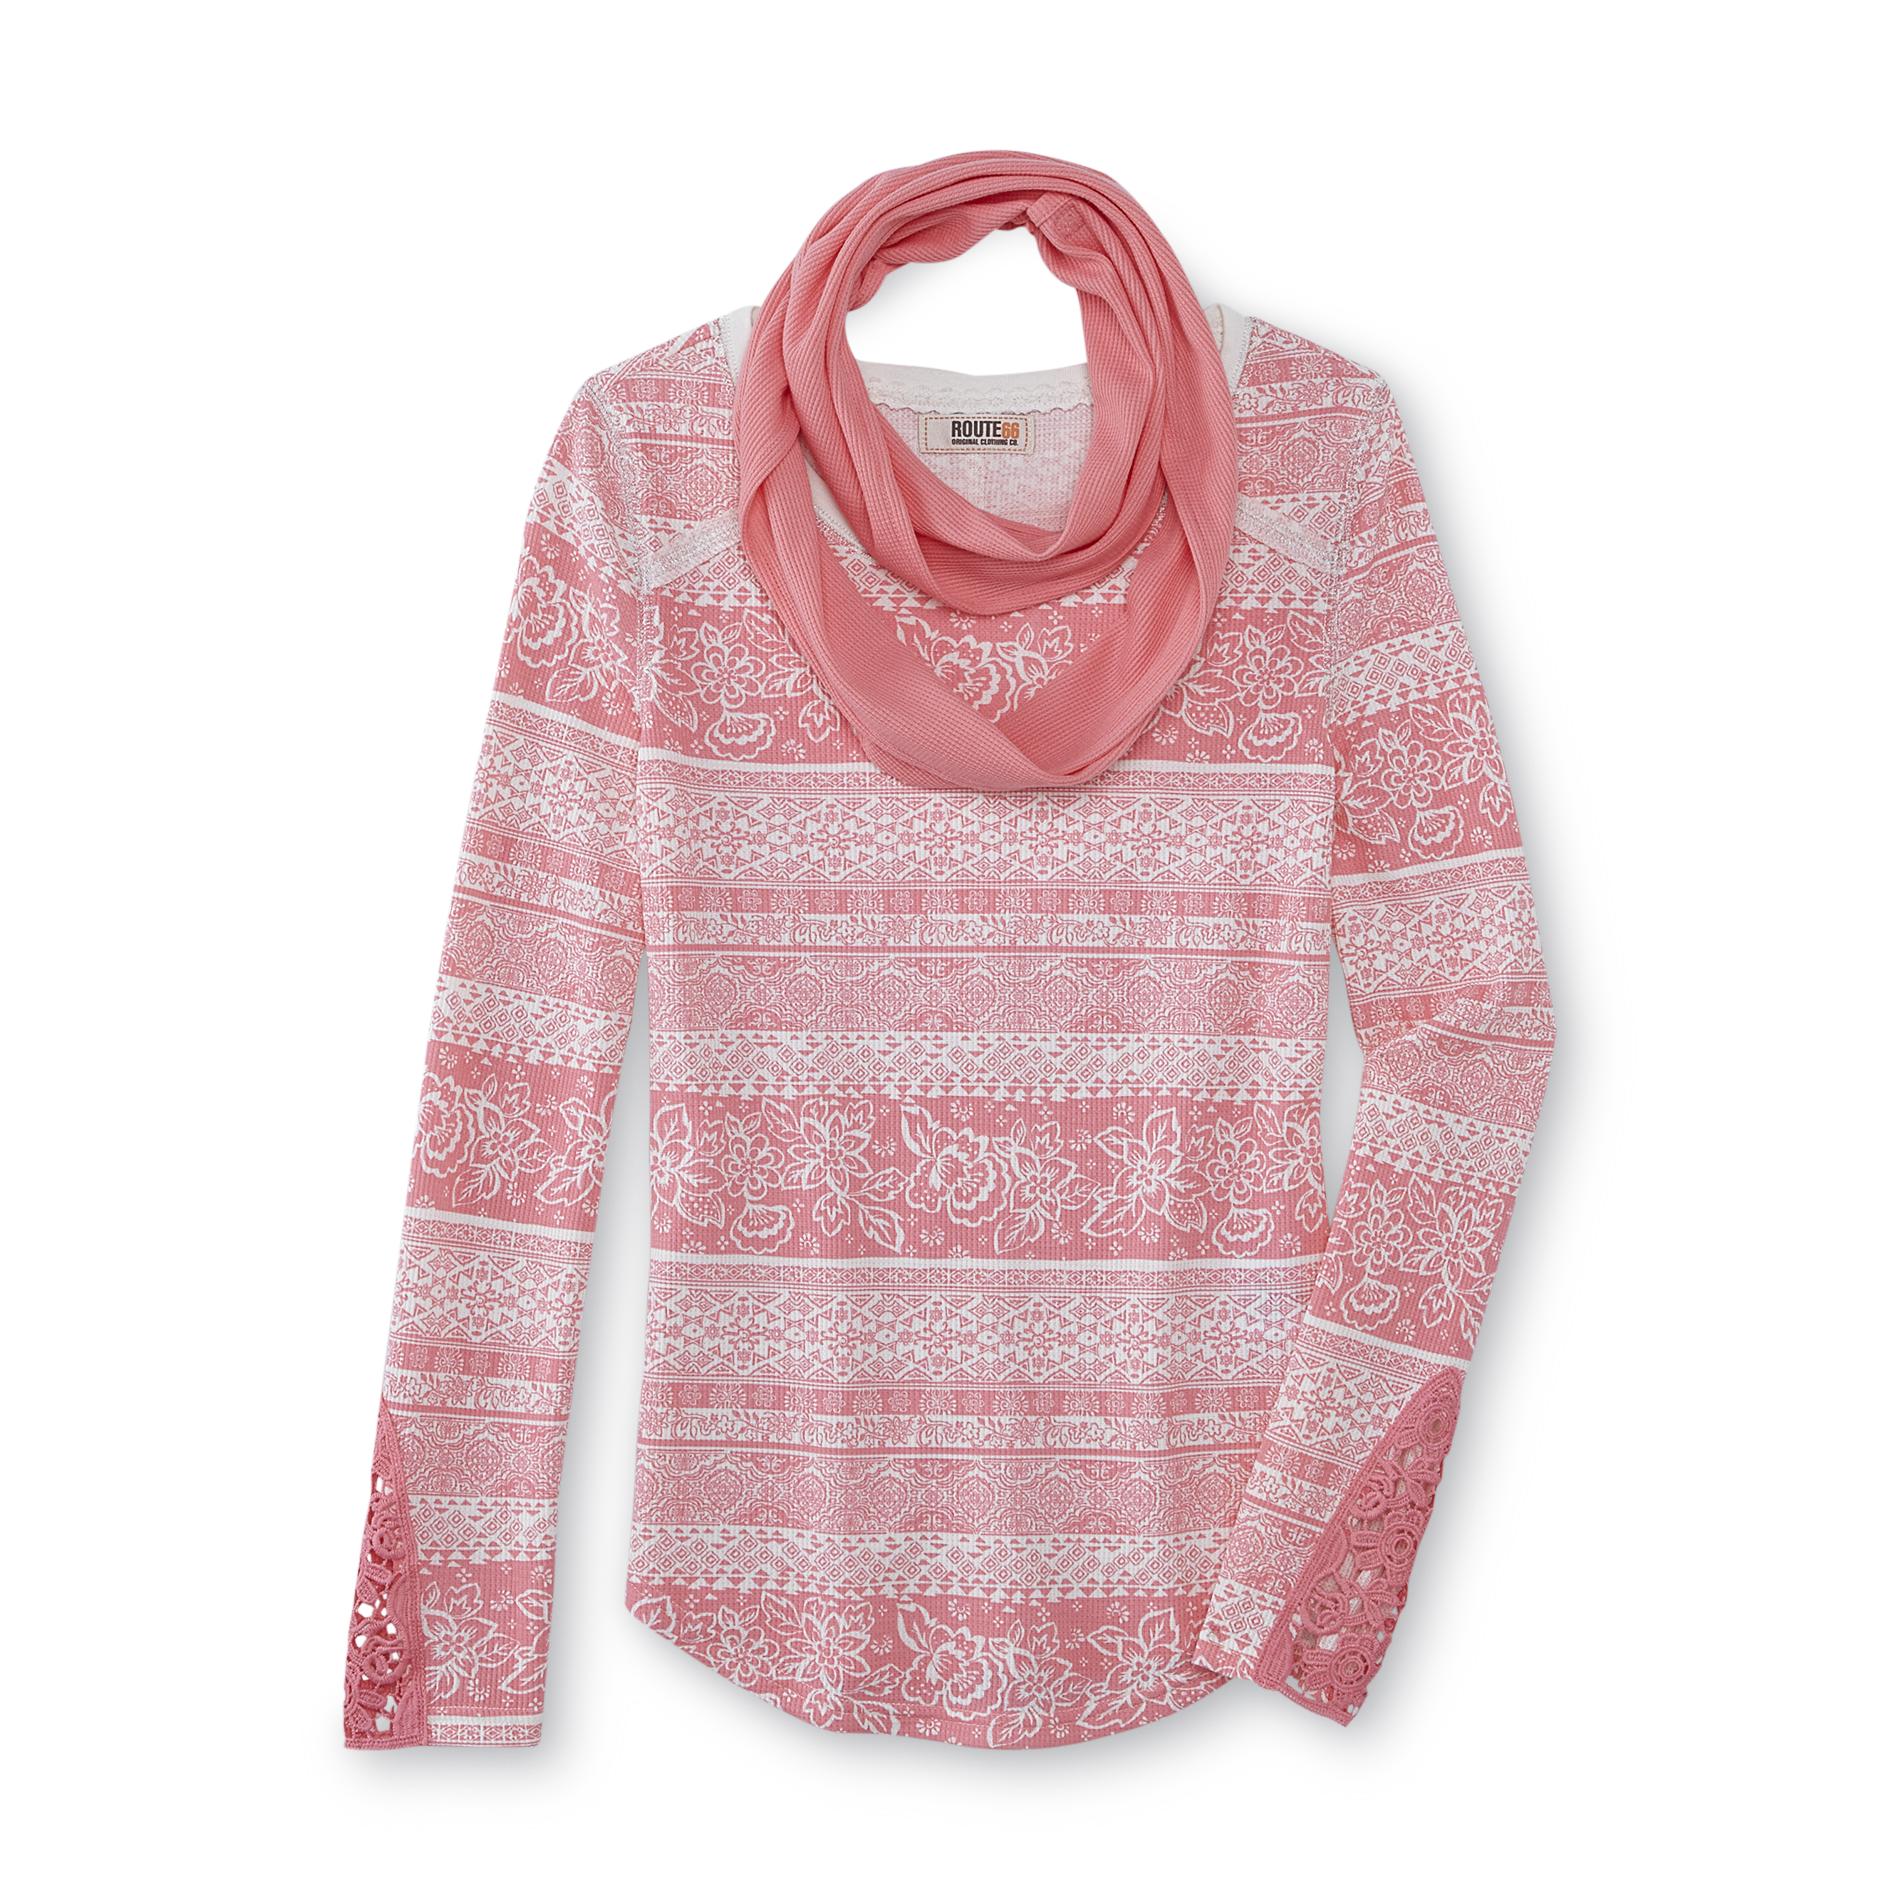 Girl's Thermal Top & Infinity Scarf - Striped